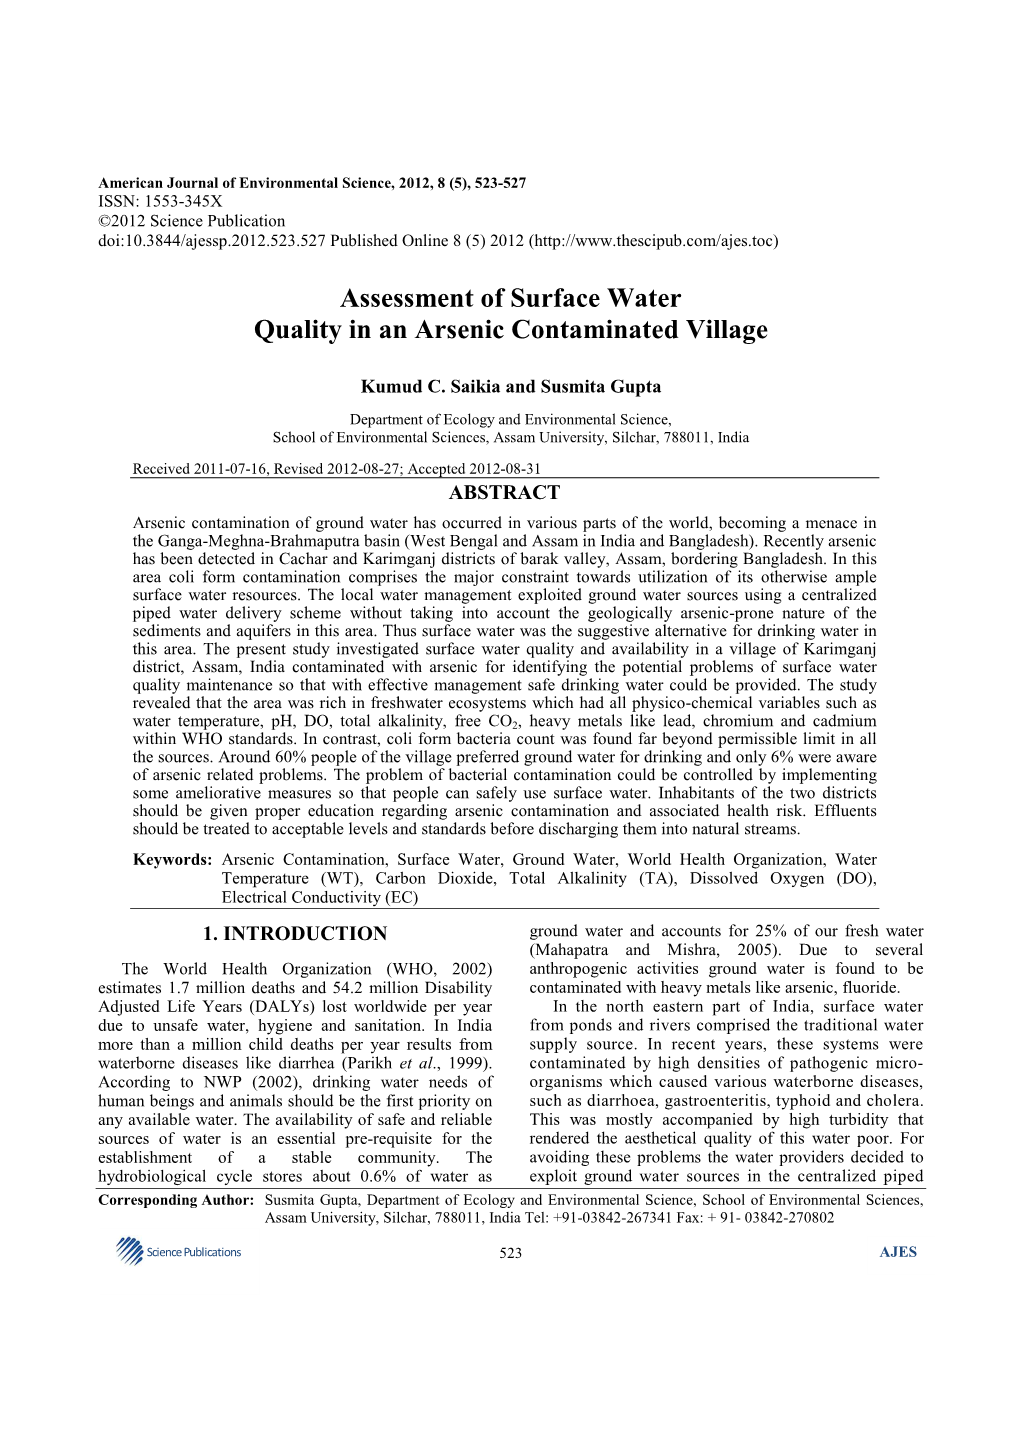 Assessment of Surface Water Quality in an Arsenic Contaminated Village